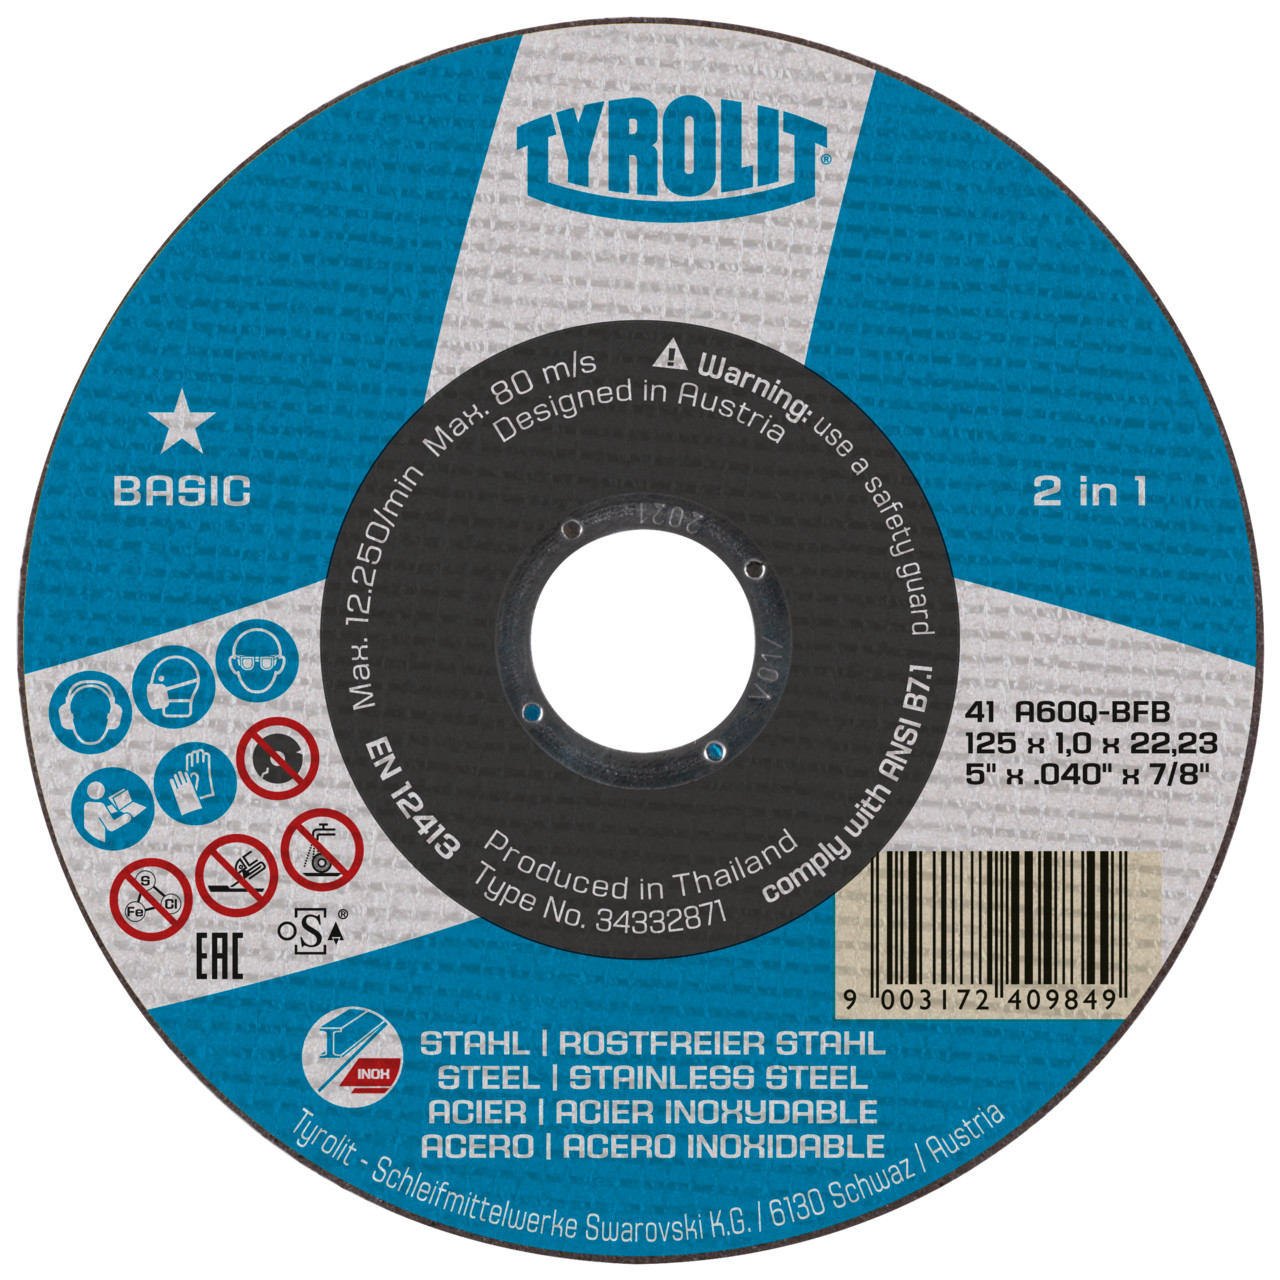 Tyrolit Cutting discs DxUxH 125x2.5x22.23 2in1 for steel and stainless steel, shape: 42 - offset version, Art. 223022